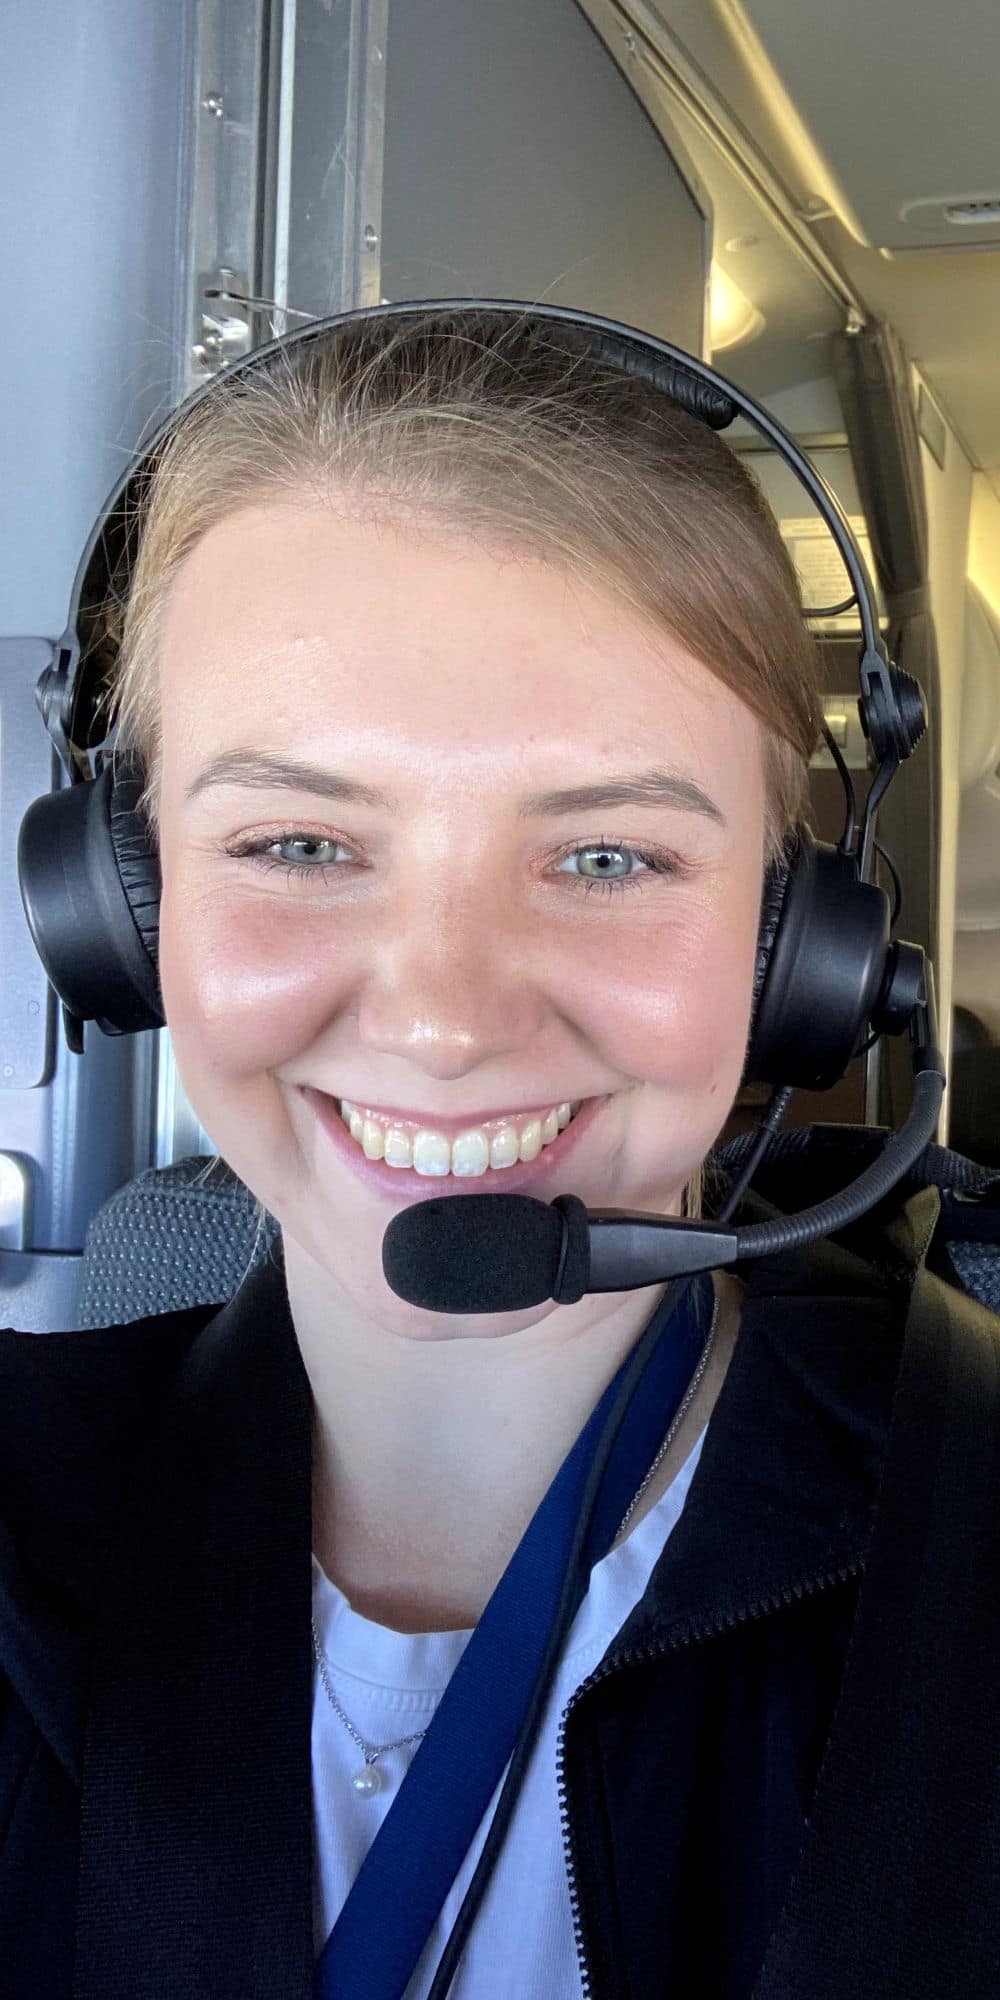 Megan Gill is all smiles as she gets ready for another leg of a trip on the flight deck of a Horizon Air ERJ-175. (Photo: Megan Gill)